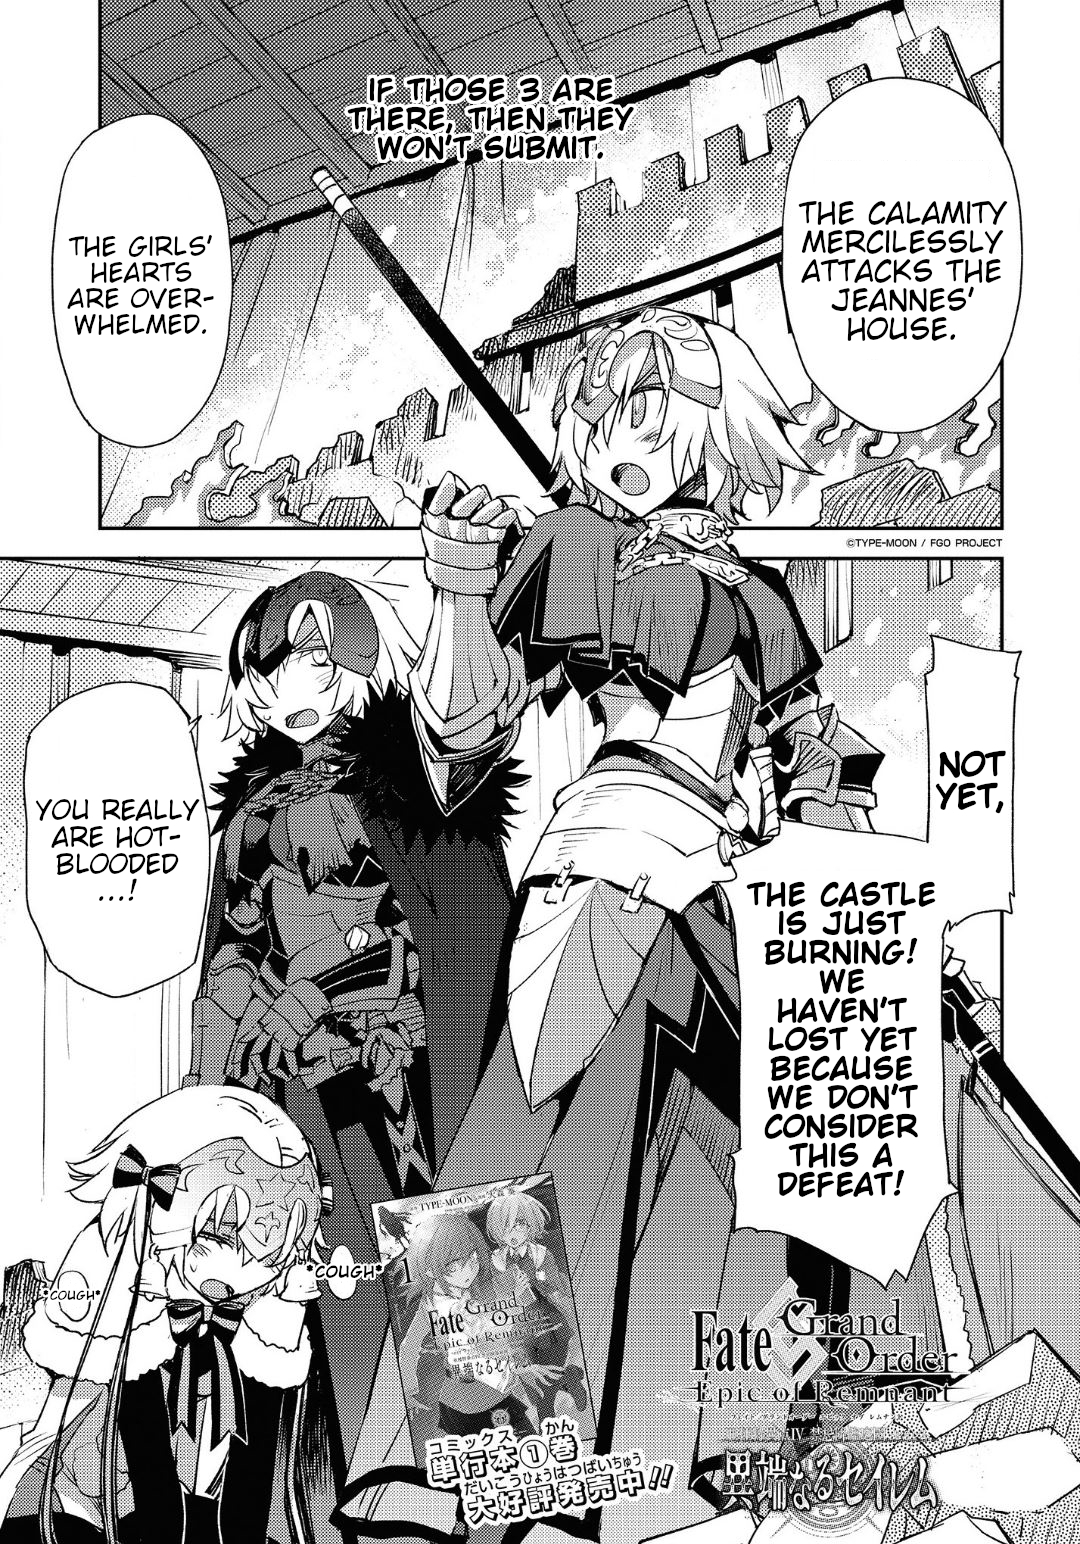 Fate/grand Order: Epic Of Remnant: Pseudo-Singularity Iv: The Forbidden Advent Garden, Salem - Heretical Salem Chapter 14: The First Knot - Picture 2